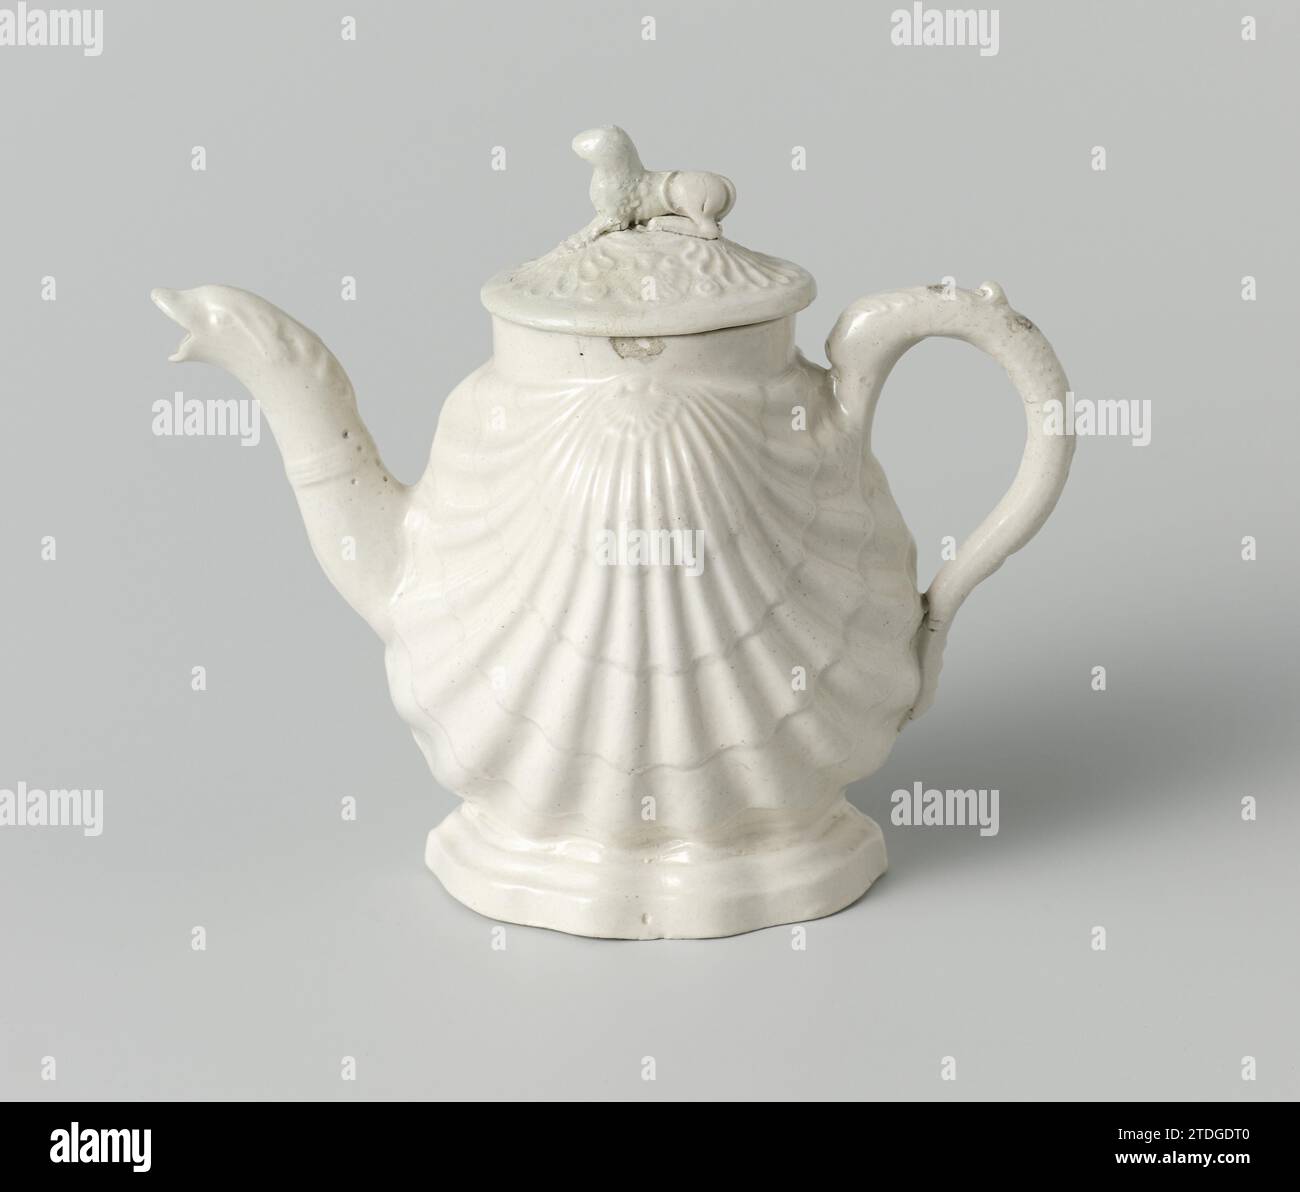 Teapot of white stoneware with salt glaze; Whieldon true, Anonymous, c. 1750 - c. 1760 Teapot of white stoneware with salt glaze. The belly of the pot has the shape of a double shell. The spout is bent and has the head of a fish as a mouth. The ear is C-shaped and has the shape of a dolphin. The lid has a horizontal dog or lion as a button. England stoneware. salt glaze Teapot of white stoneware with salt glaze. The belly of the pot has the shape of a double shell. The spout is bent and has the head of a fish as a mouth. The ear is C-shaped and has the shape of a dolphin. The lid has a horizon Stock Photo